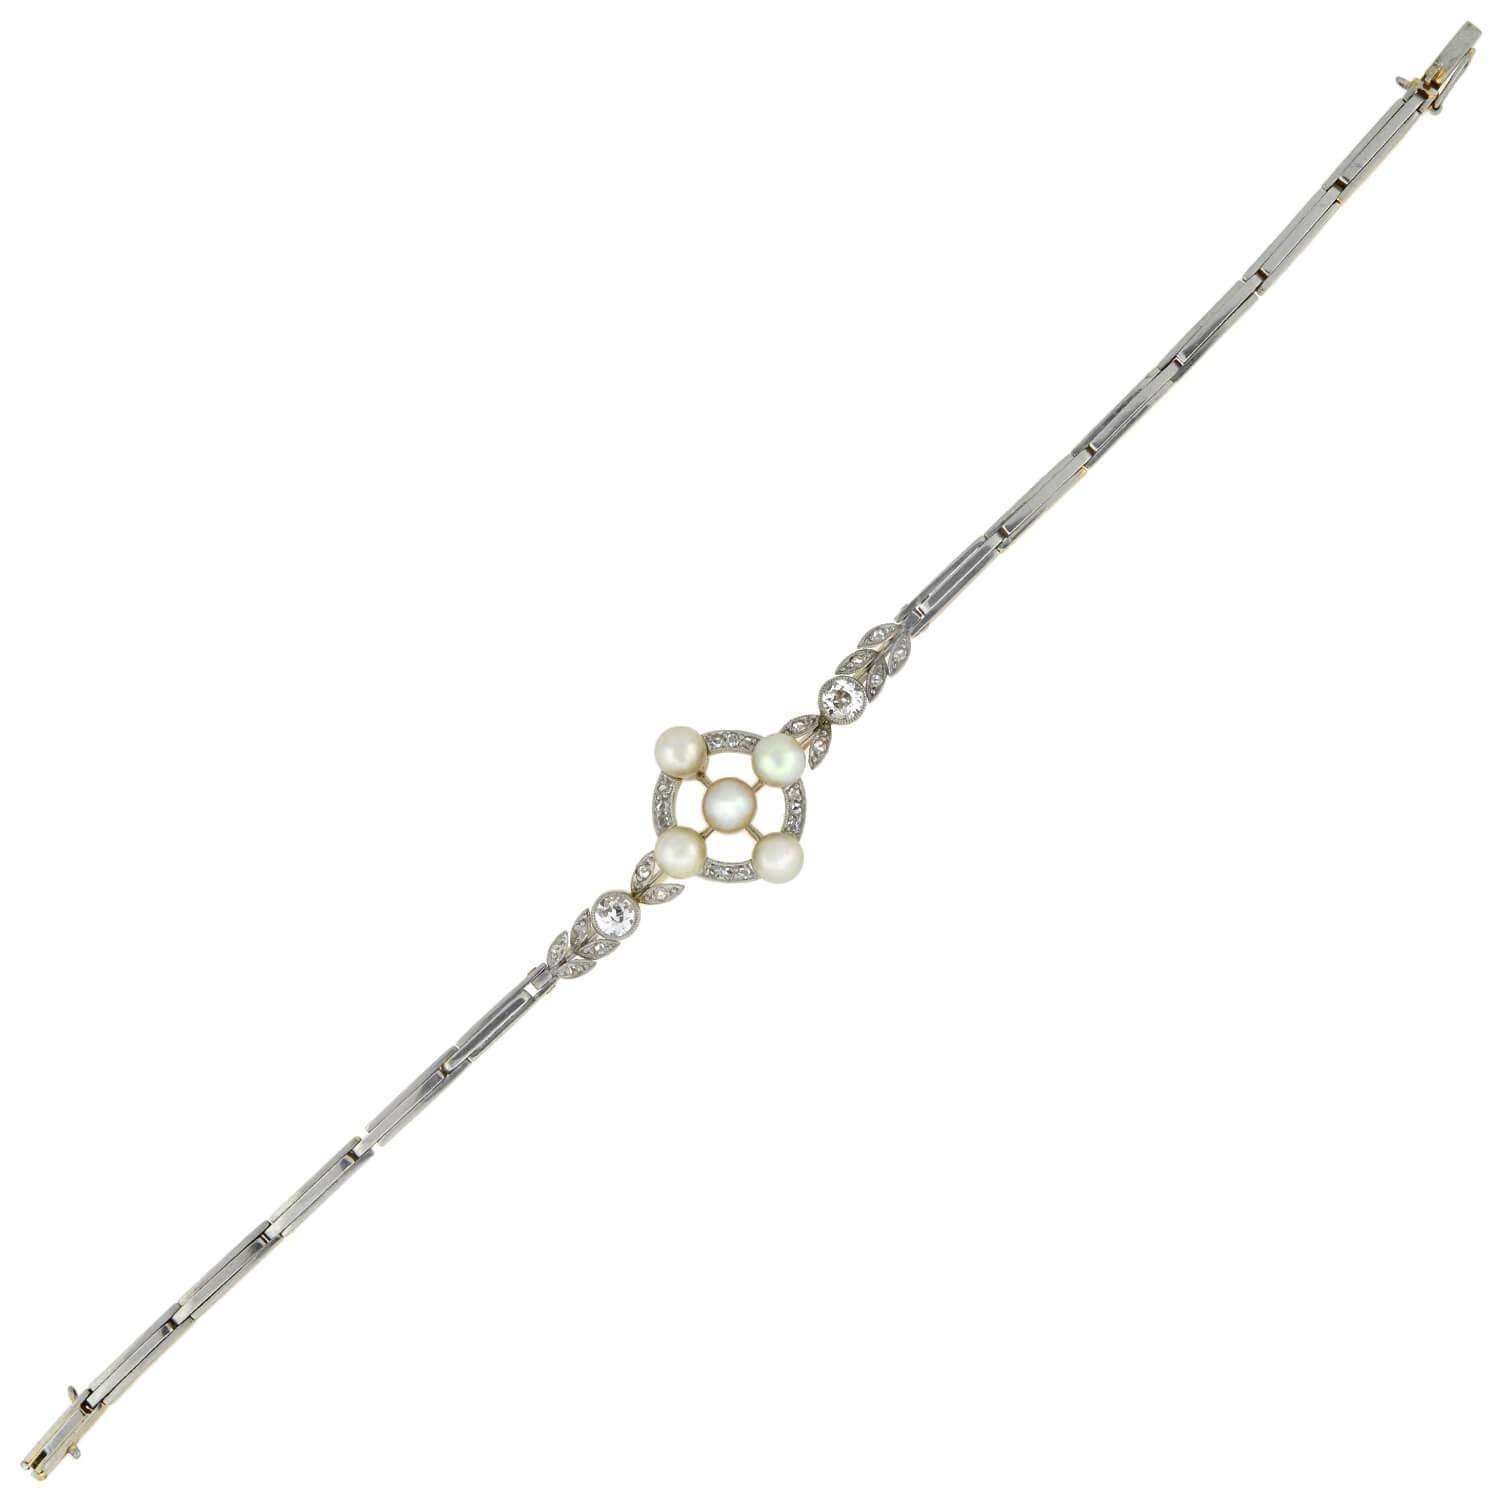 A spectacular pearl and diamond bracelet from the Edwardian (ca1910) era! This stunning platinum topped 18kt yellow gold piece adorns an elaborate design at the center of a simple gate link bracelet. The beautiful centerpiece is formed by a diamond